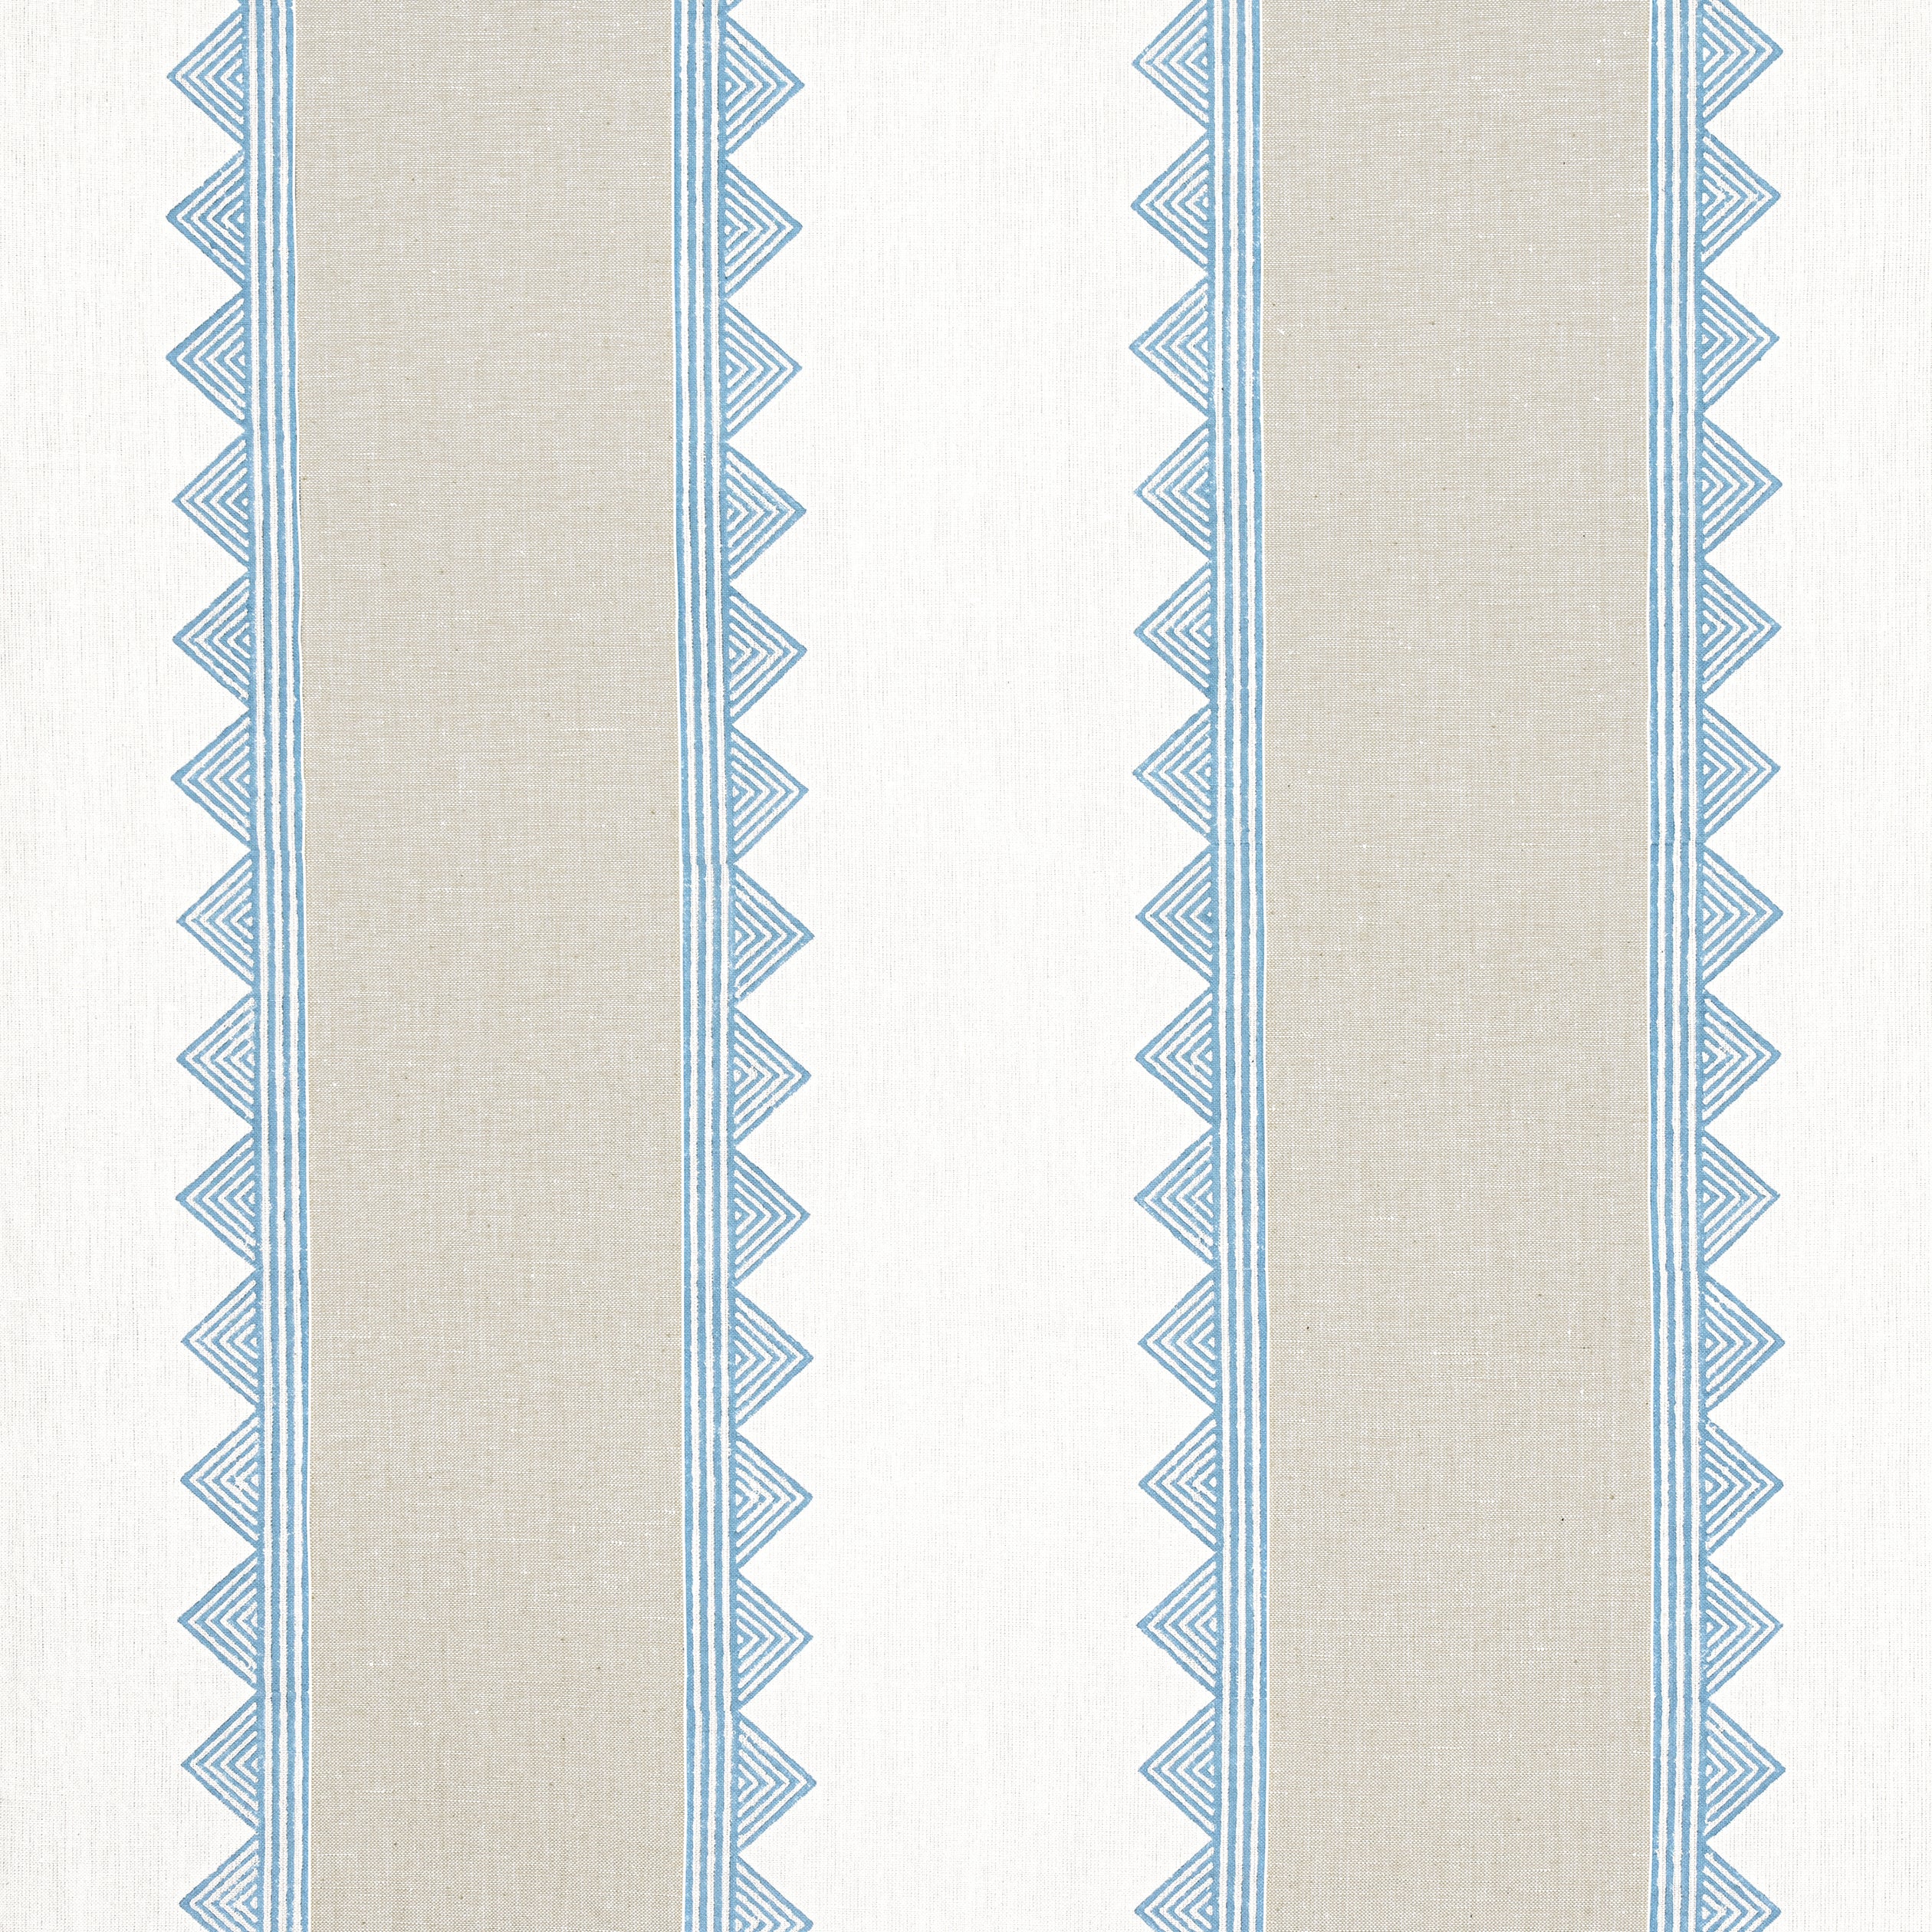 Kismet Stripe fabric in french blue color - pattern number F916228 - by Thibaut in the Kismet collection